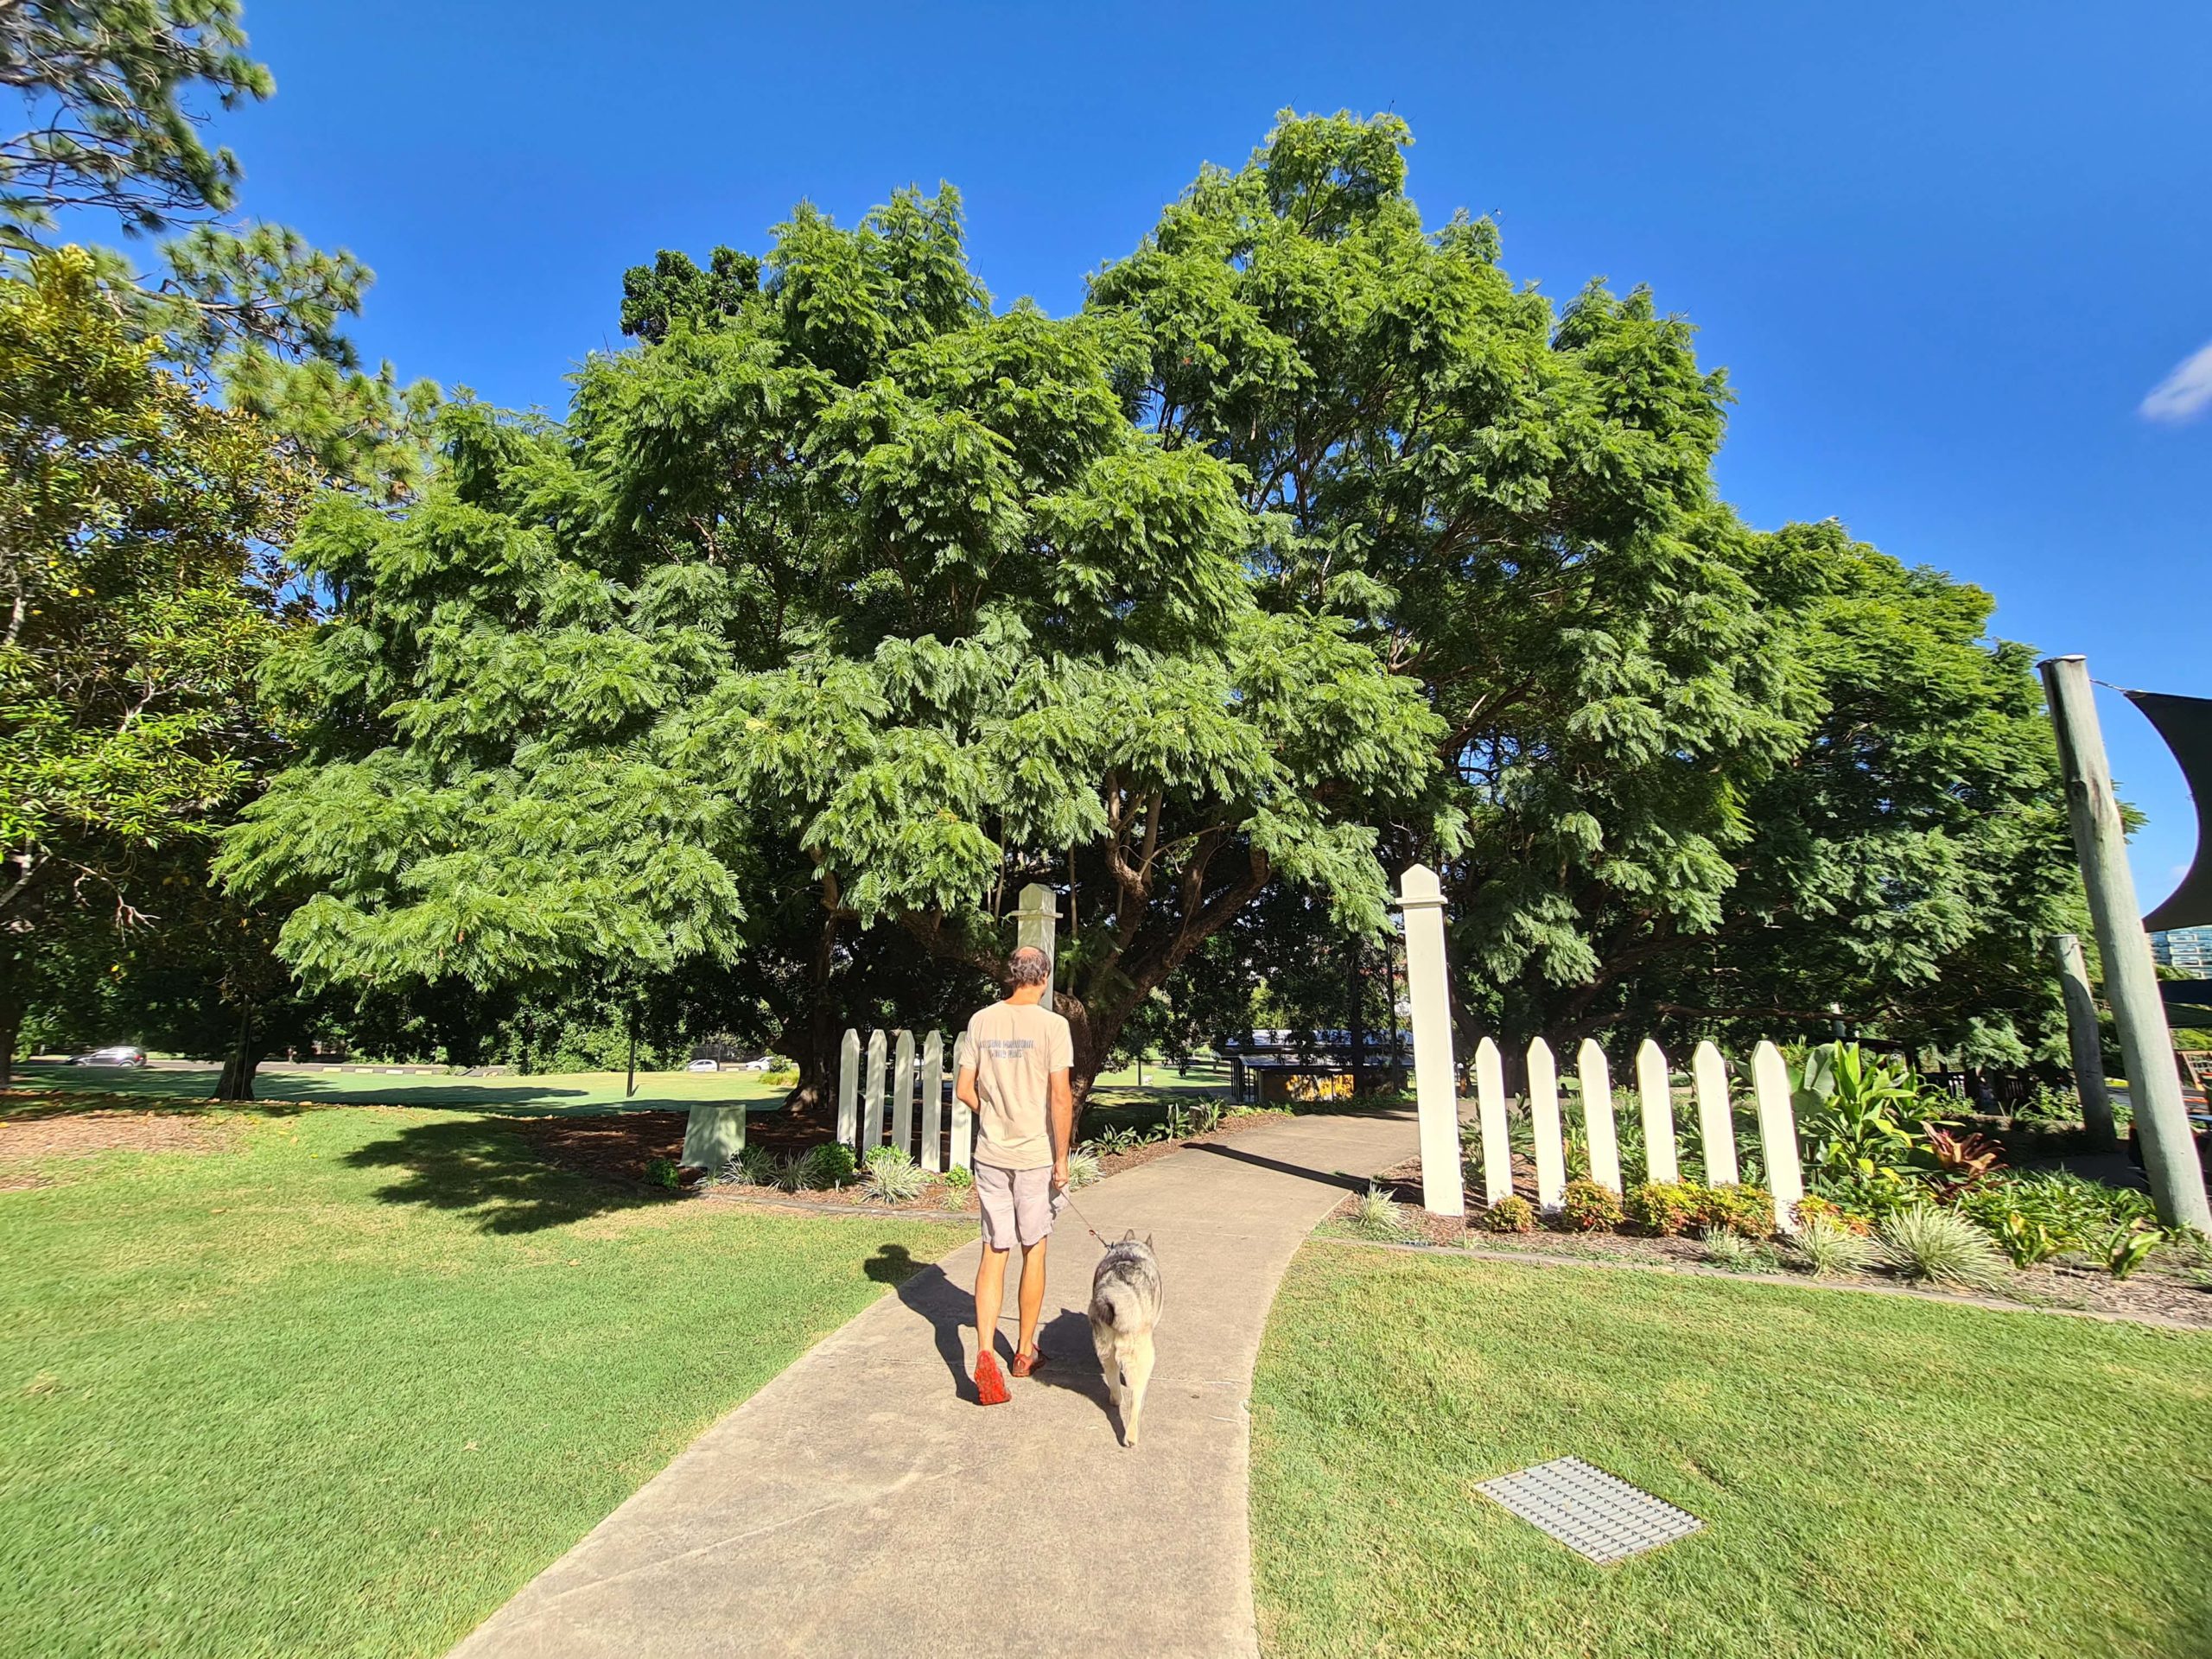 Take a dog-friendly getaway in Ipswich - Walking the dog on leash at Queens Park. Photo Credit - Kate Webster